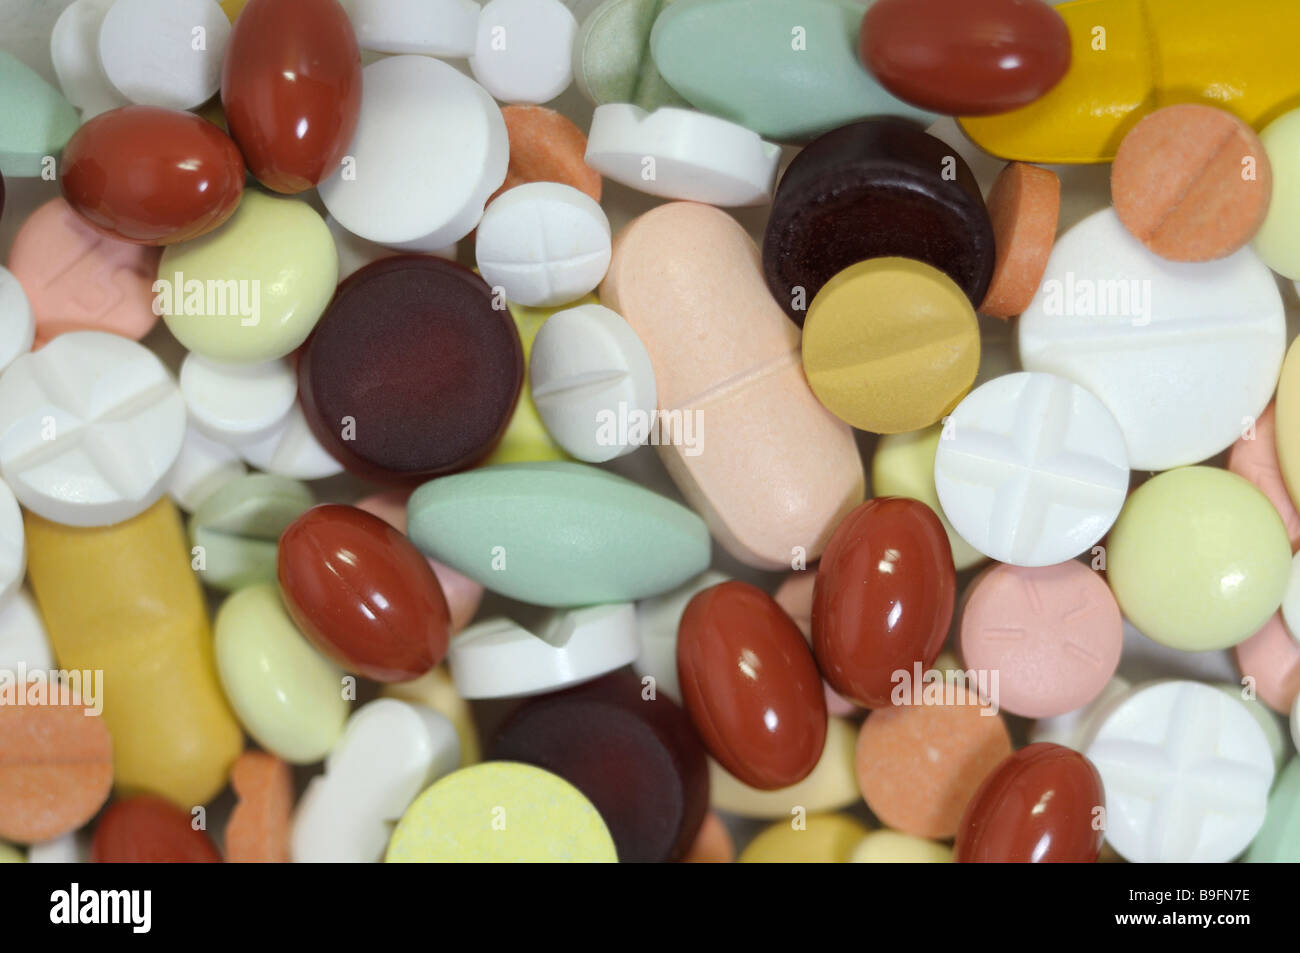 Colorful tablets Stock Photo